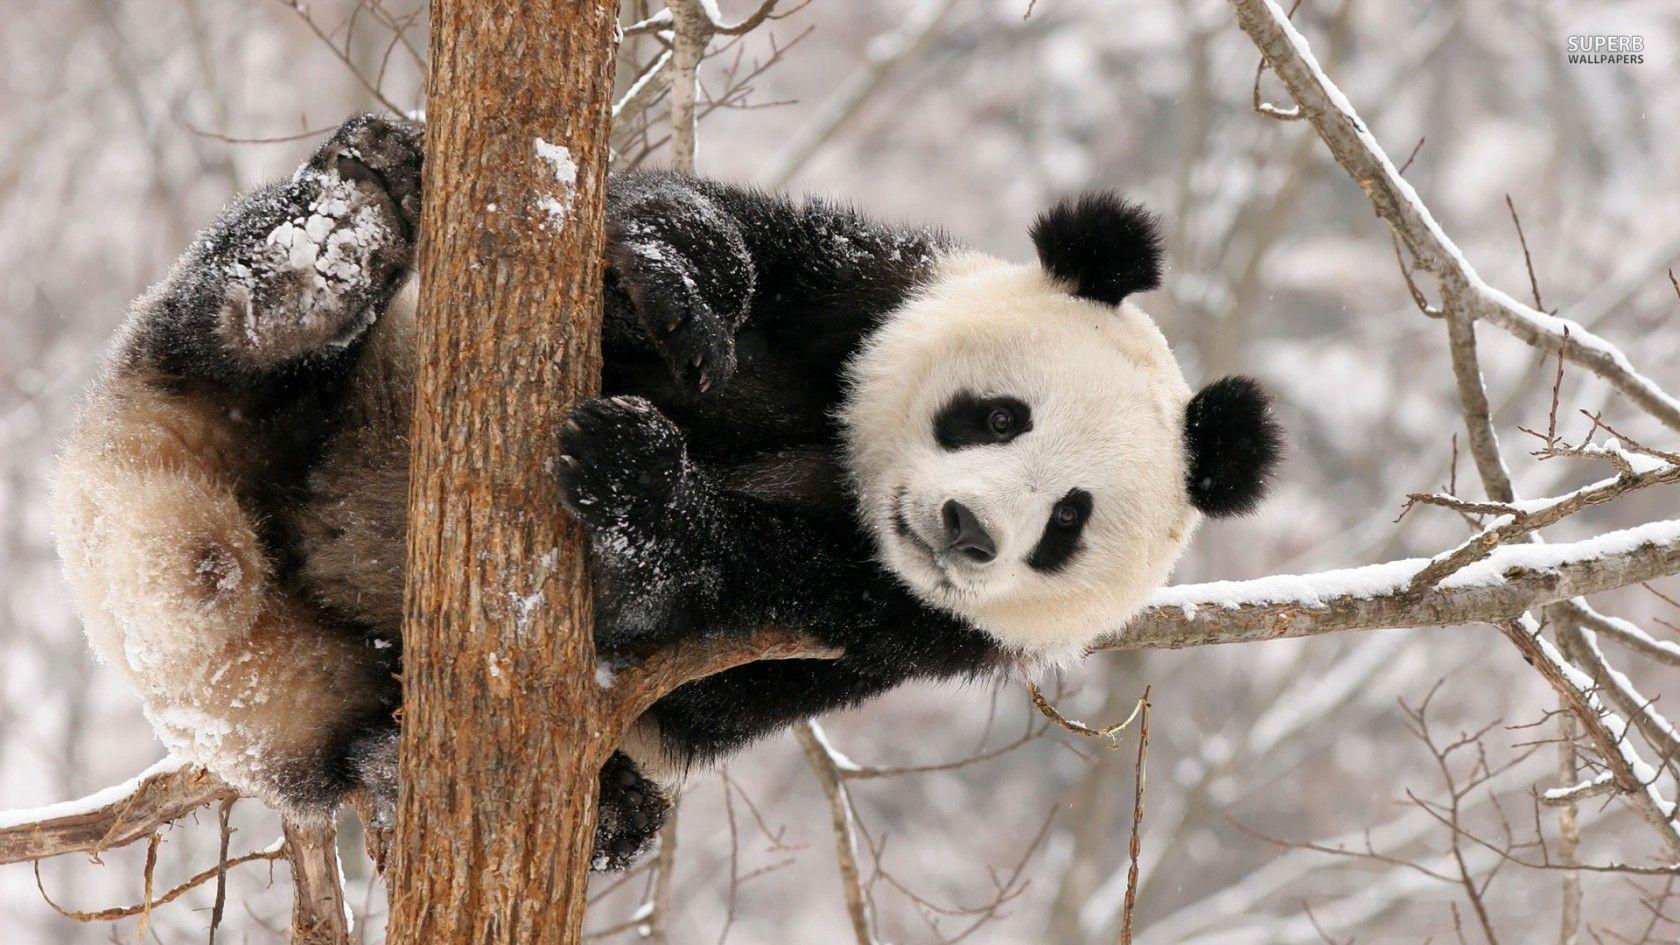 Panda Sleeping On A Branch Background, Baby Panda, Carnivore, Panda  Background Image And Wallpaper for Free Download